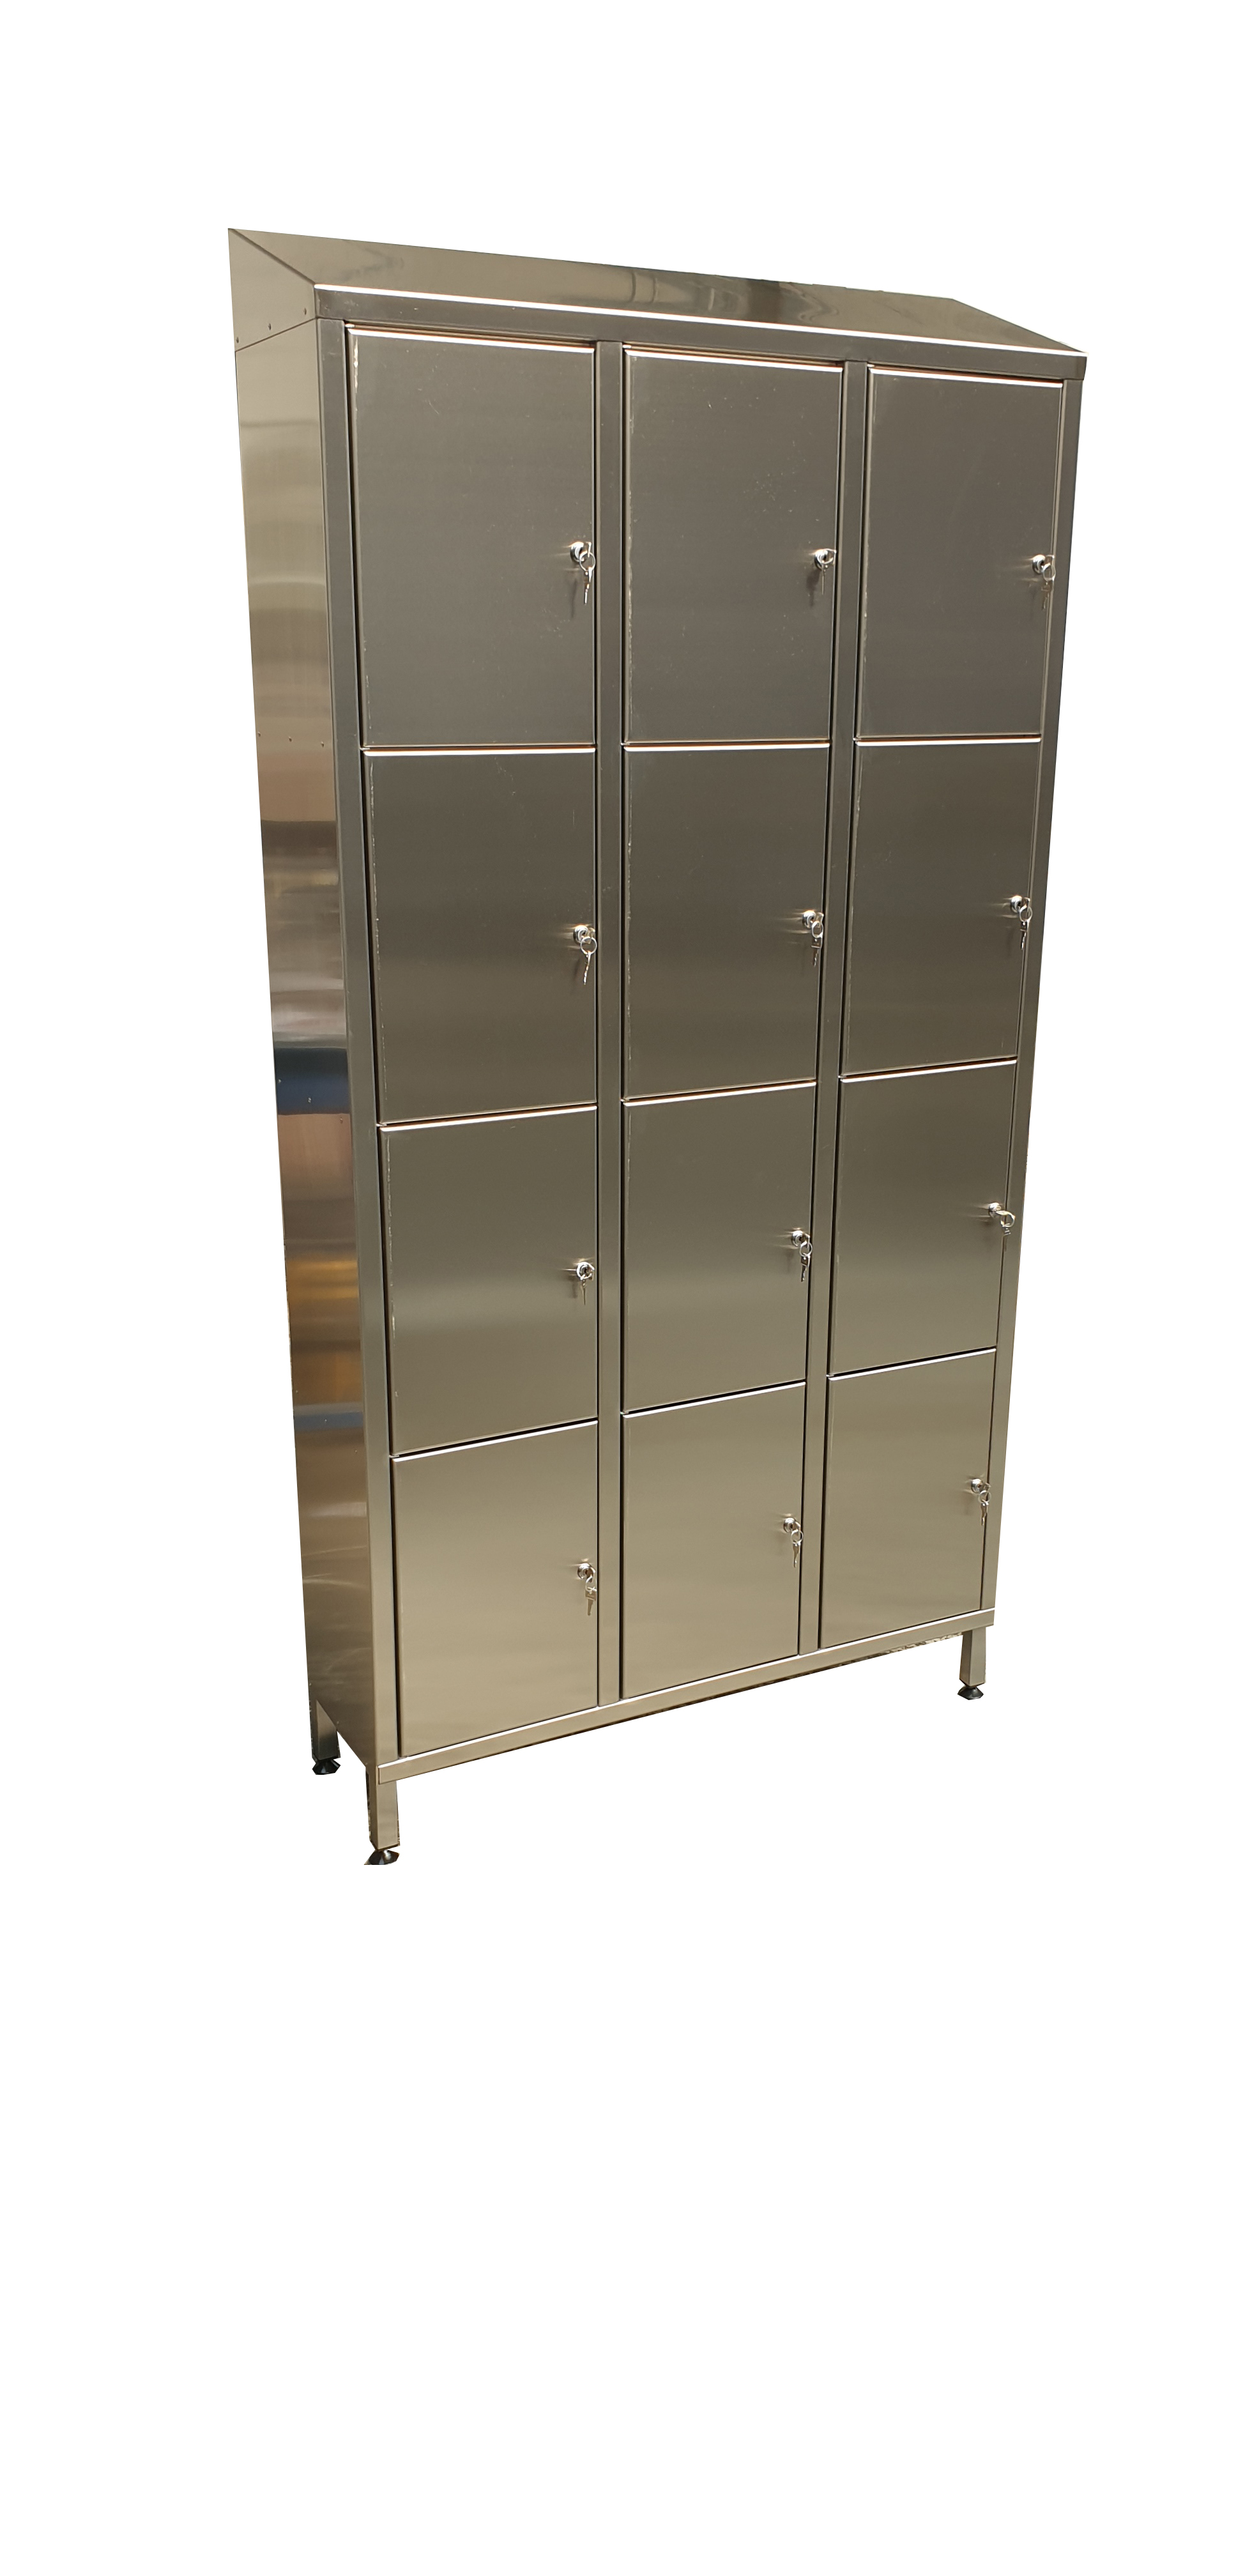 Stainless Steel Changing Room Equipment